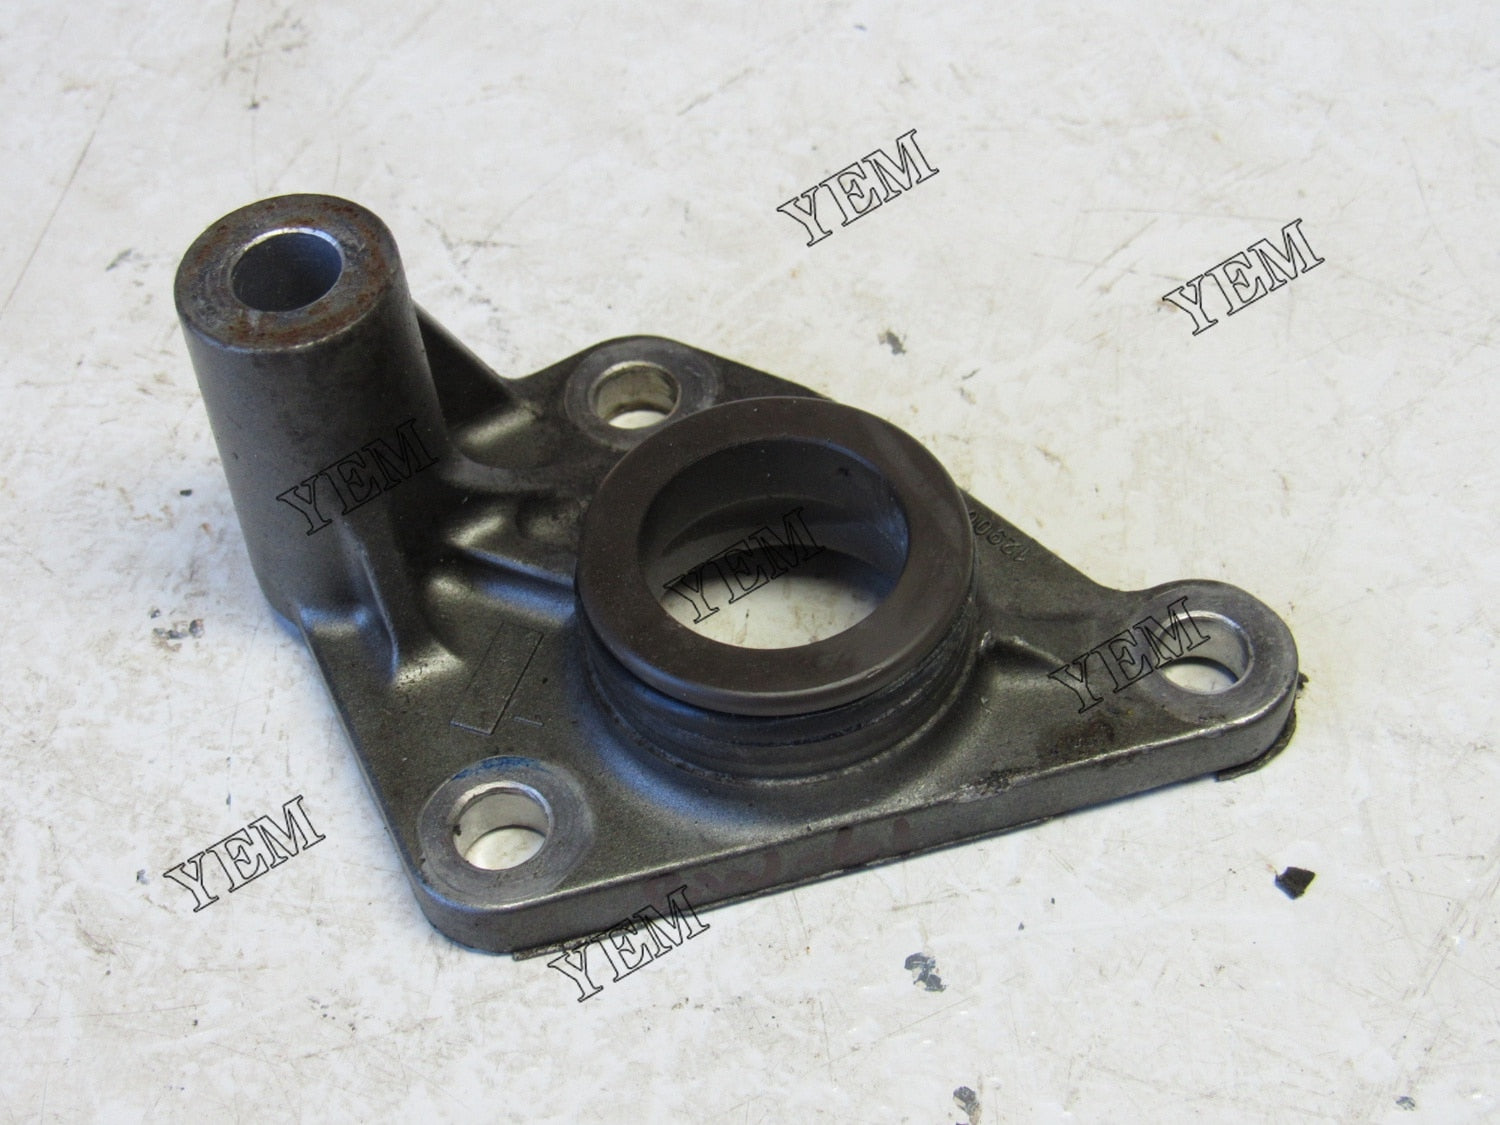 YEM Engine Parts 1 Piece Joint 129004-42040 For Yanmar 3TNV84-GDD Engine Water Pump 129004-42001 For Yanmar